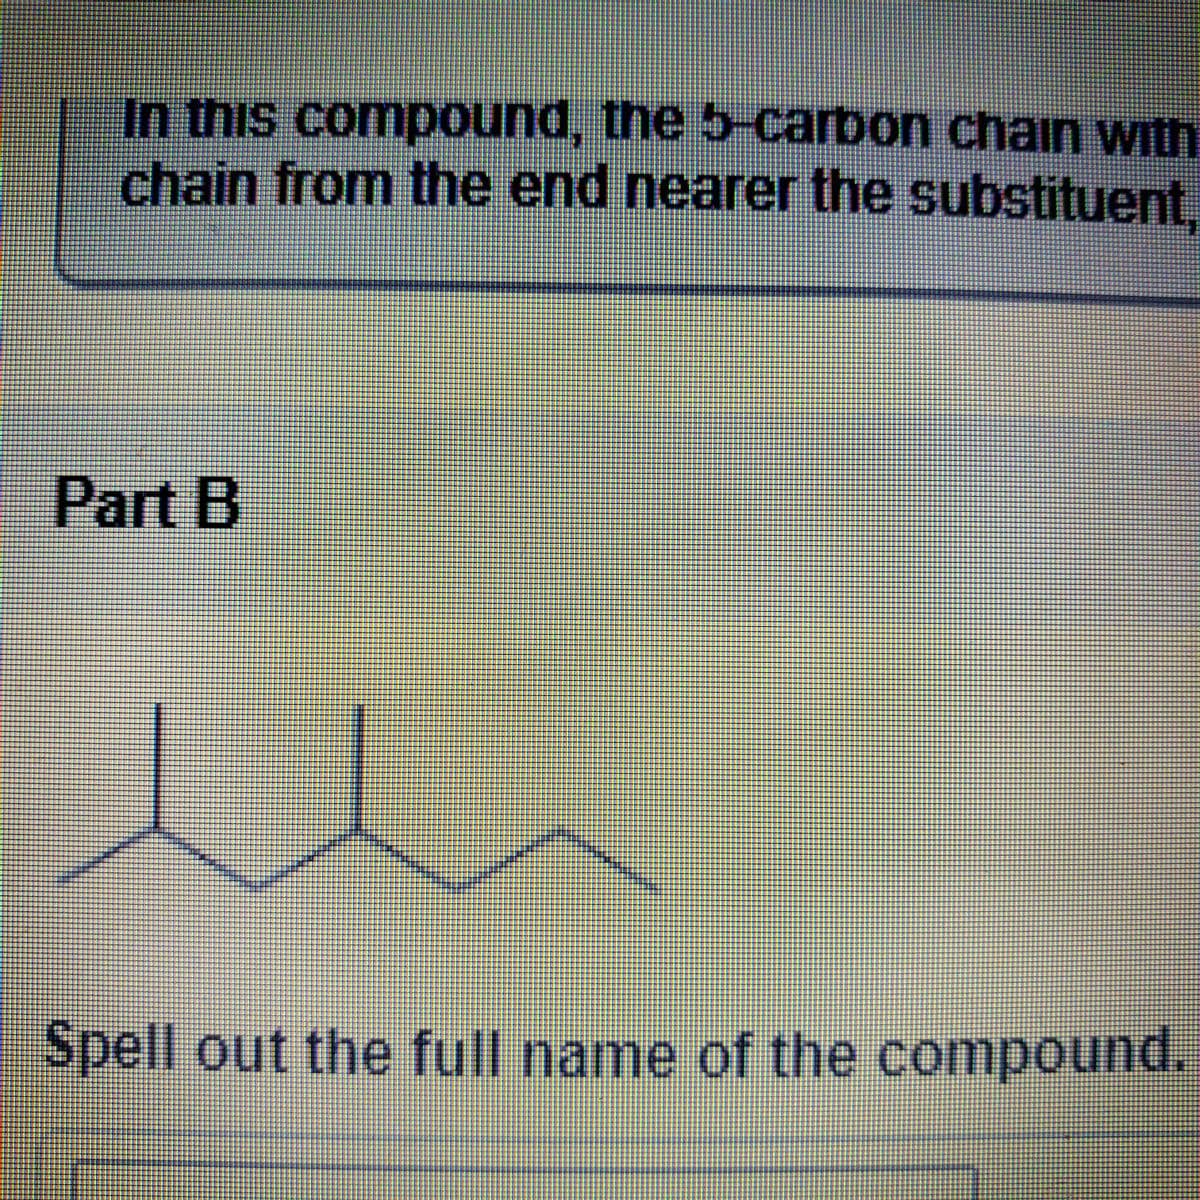 In this compound, the 5-carbon chain with
chain from the end nearer the substituent,
Part B
Spell out the full name of the compound.
